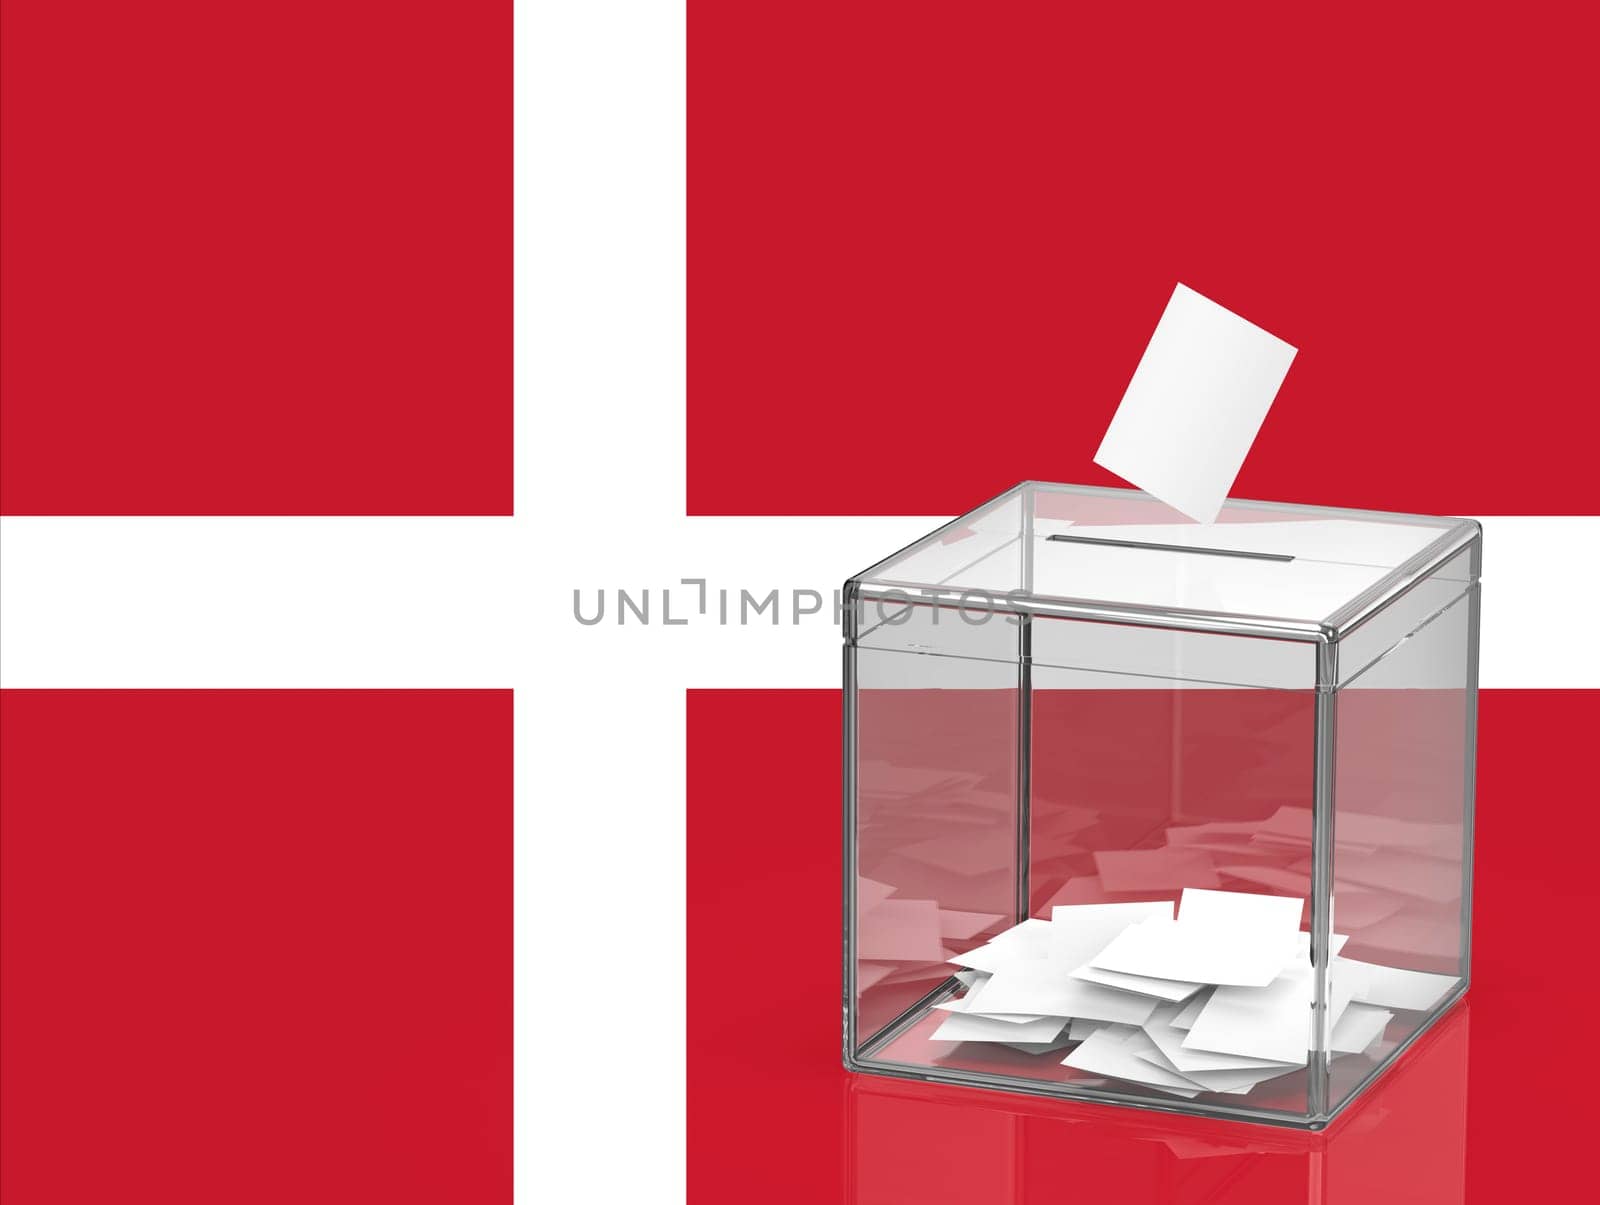 Concept image for elections in Denmark by magraphics